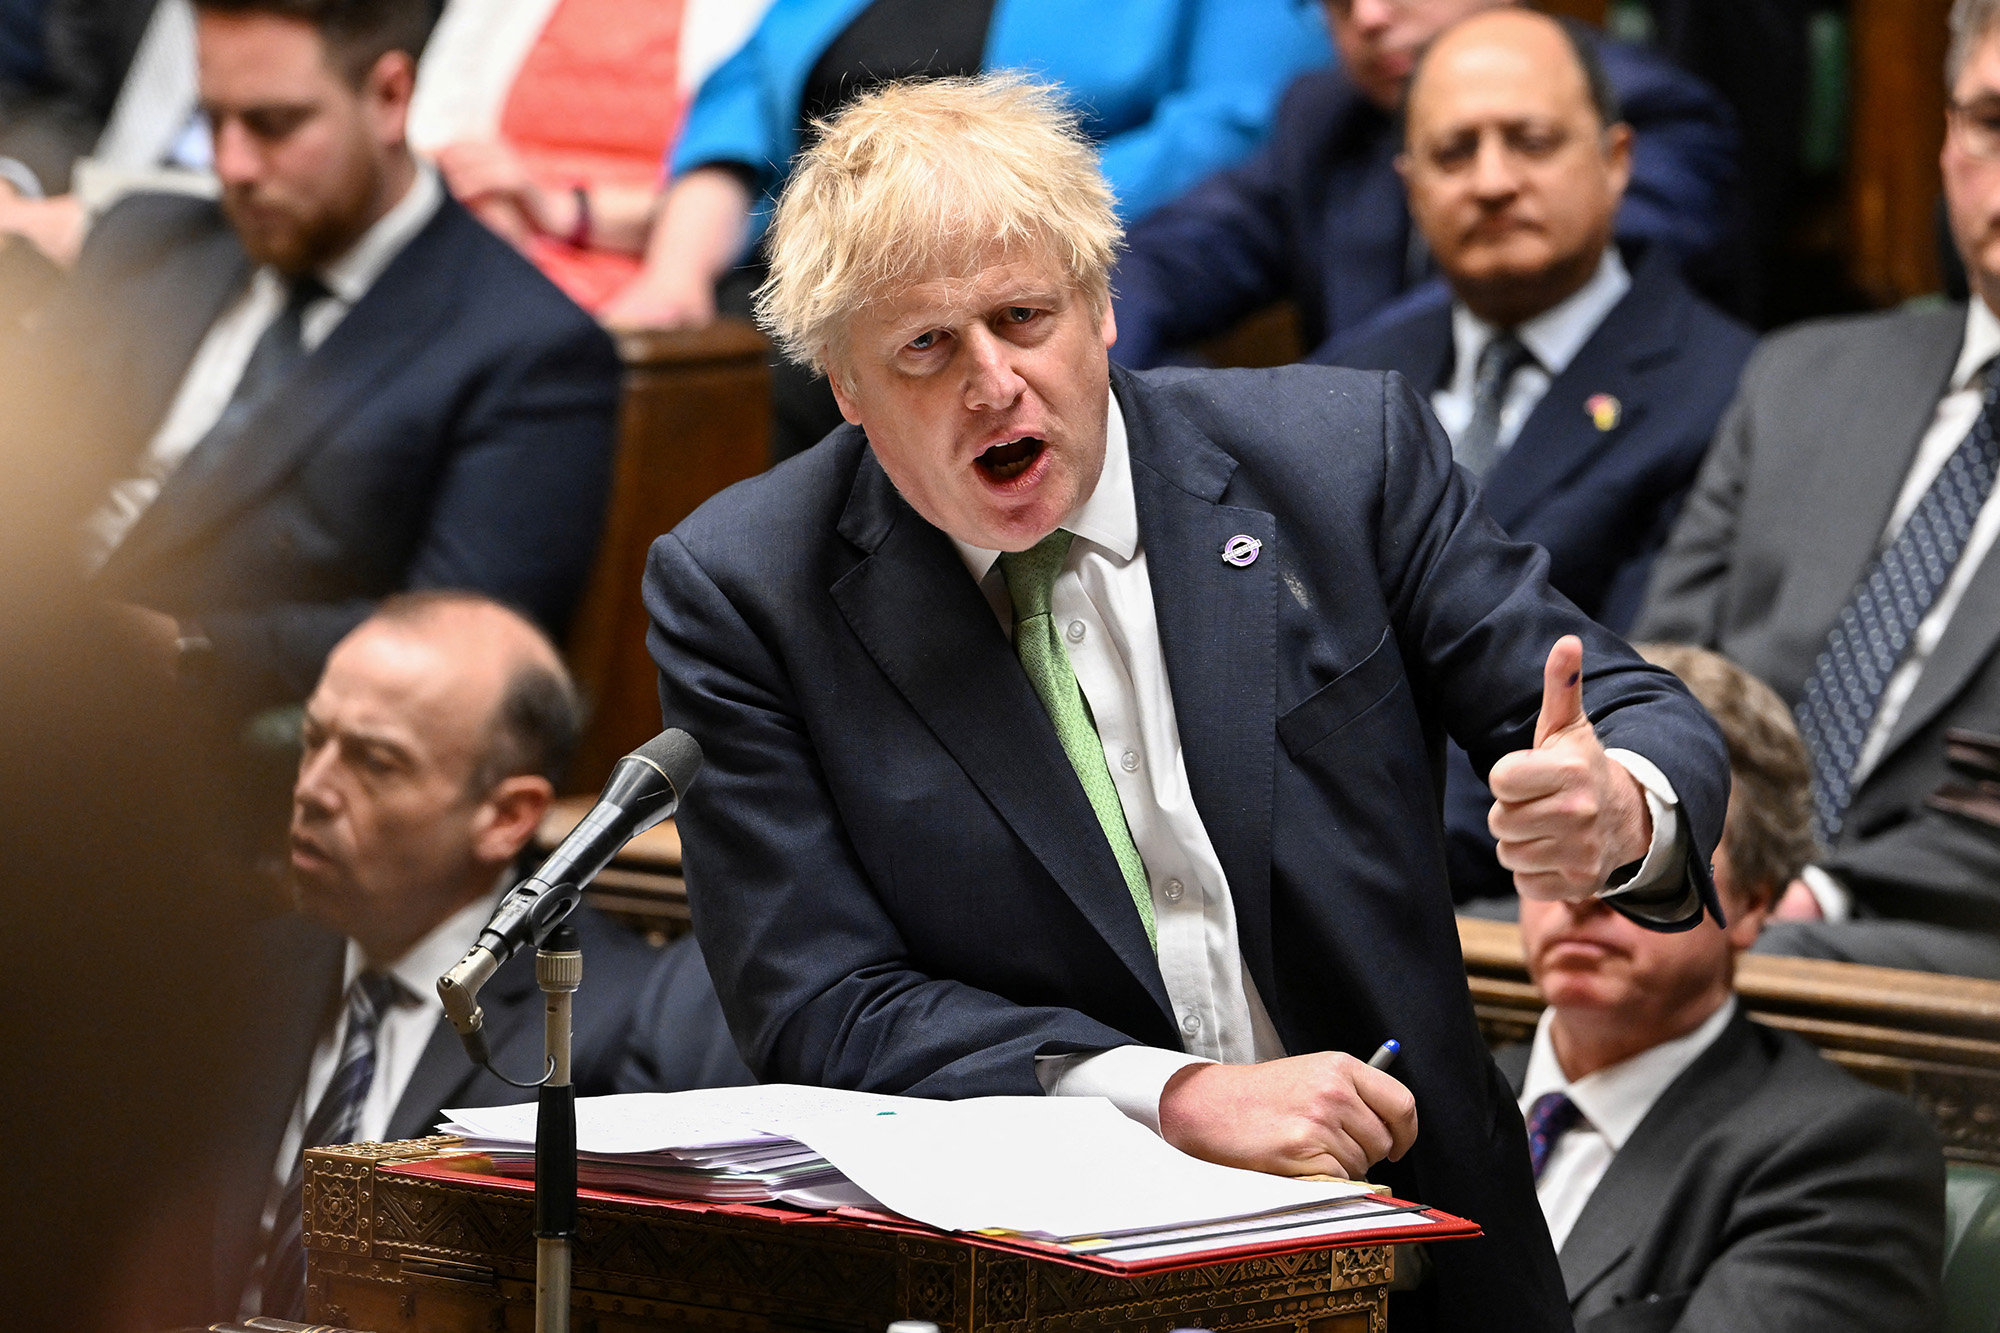 British Prime Minister Boris Johnson speaks as he takes questions at the House of Commons, in London, England, on May 18.